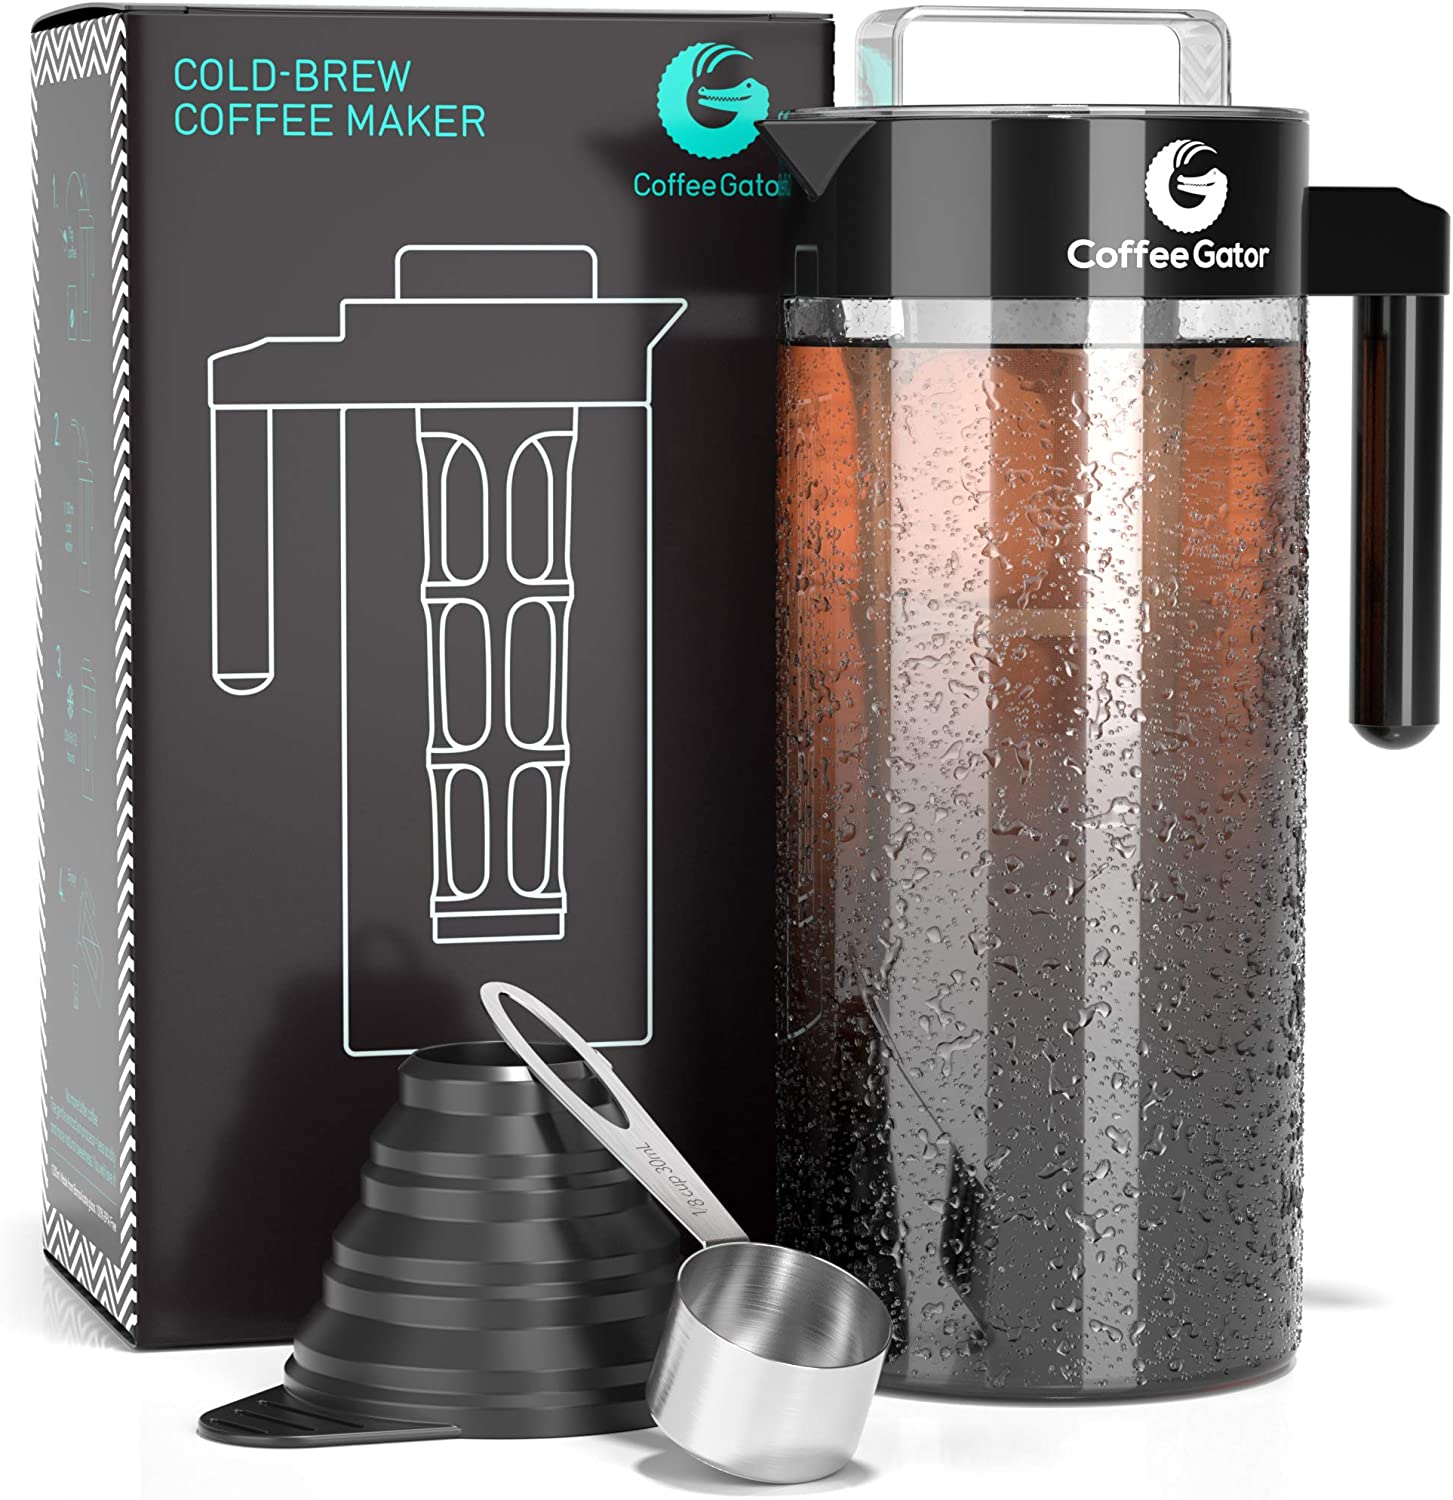 Cold Brew kit by Coffee Gator